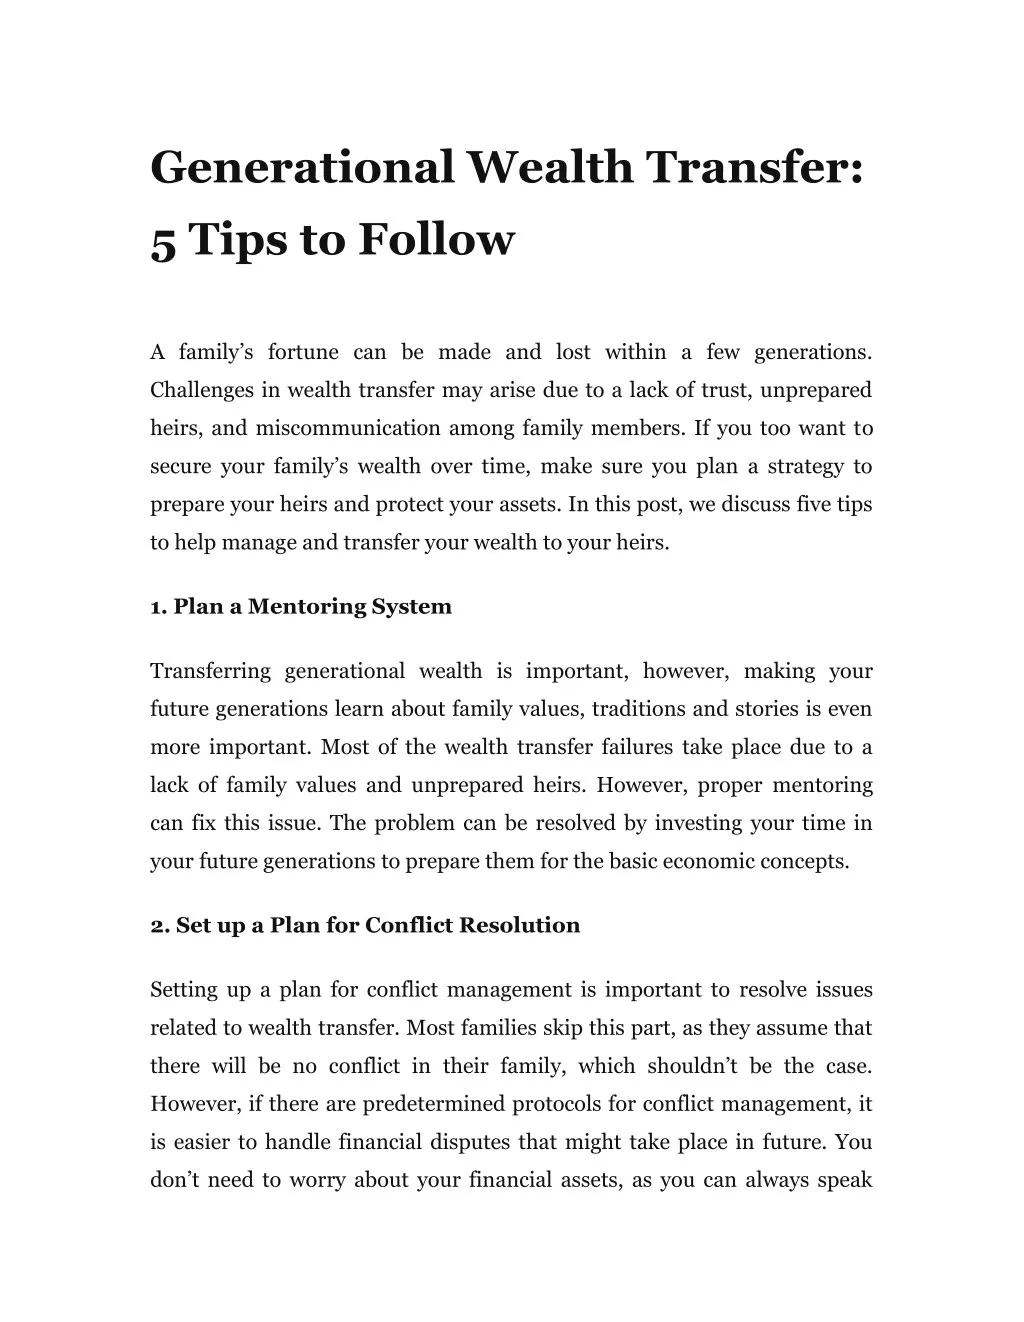 generational wealth transfer 5 tips to follow